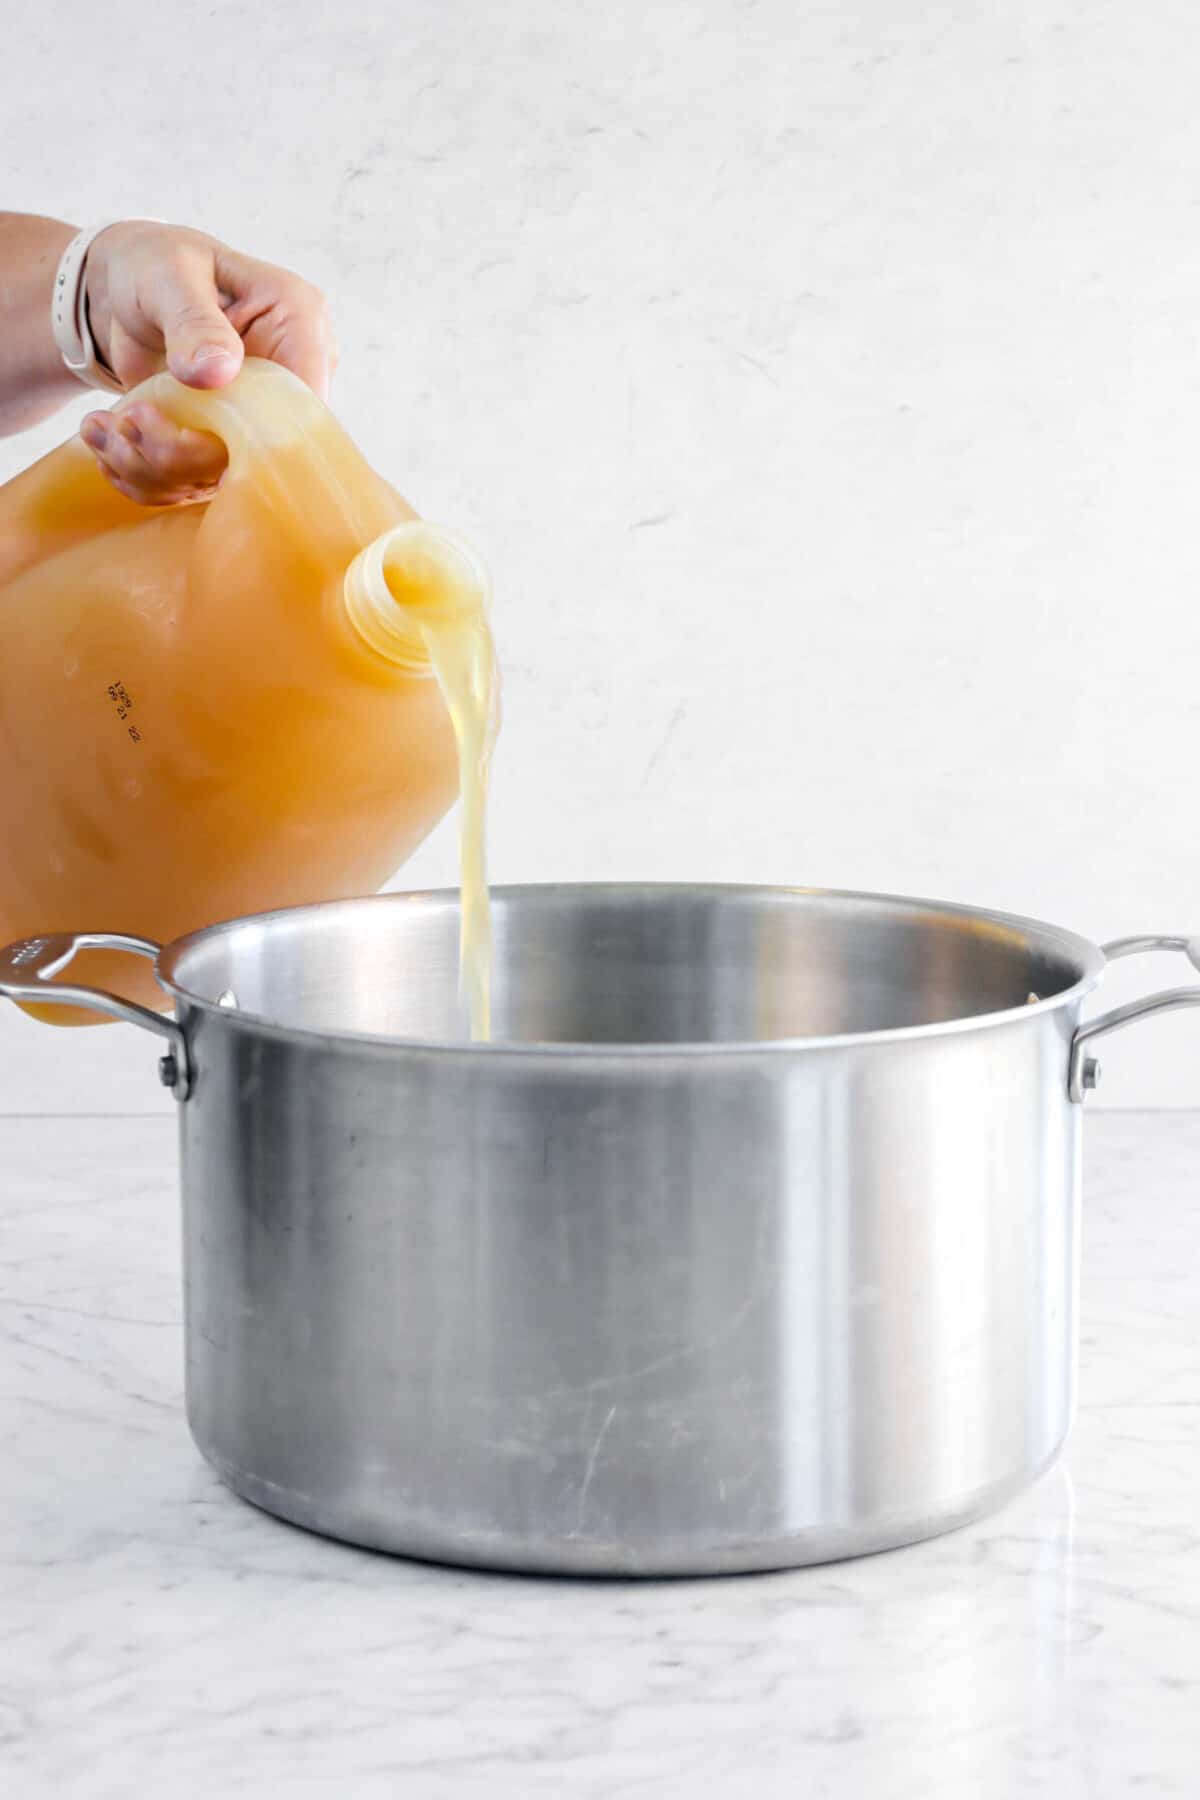 apple cider being poured into large pot